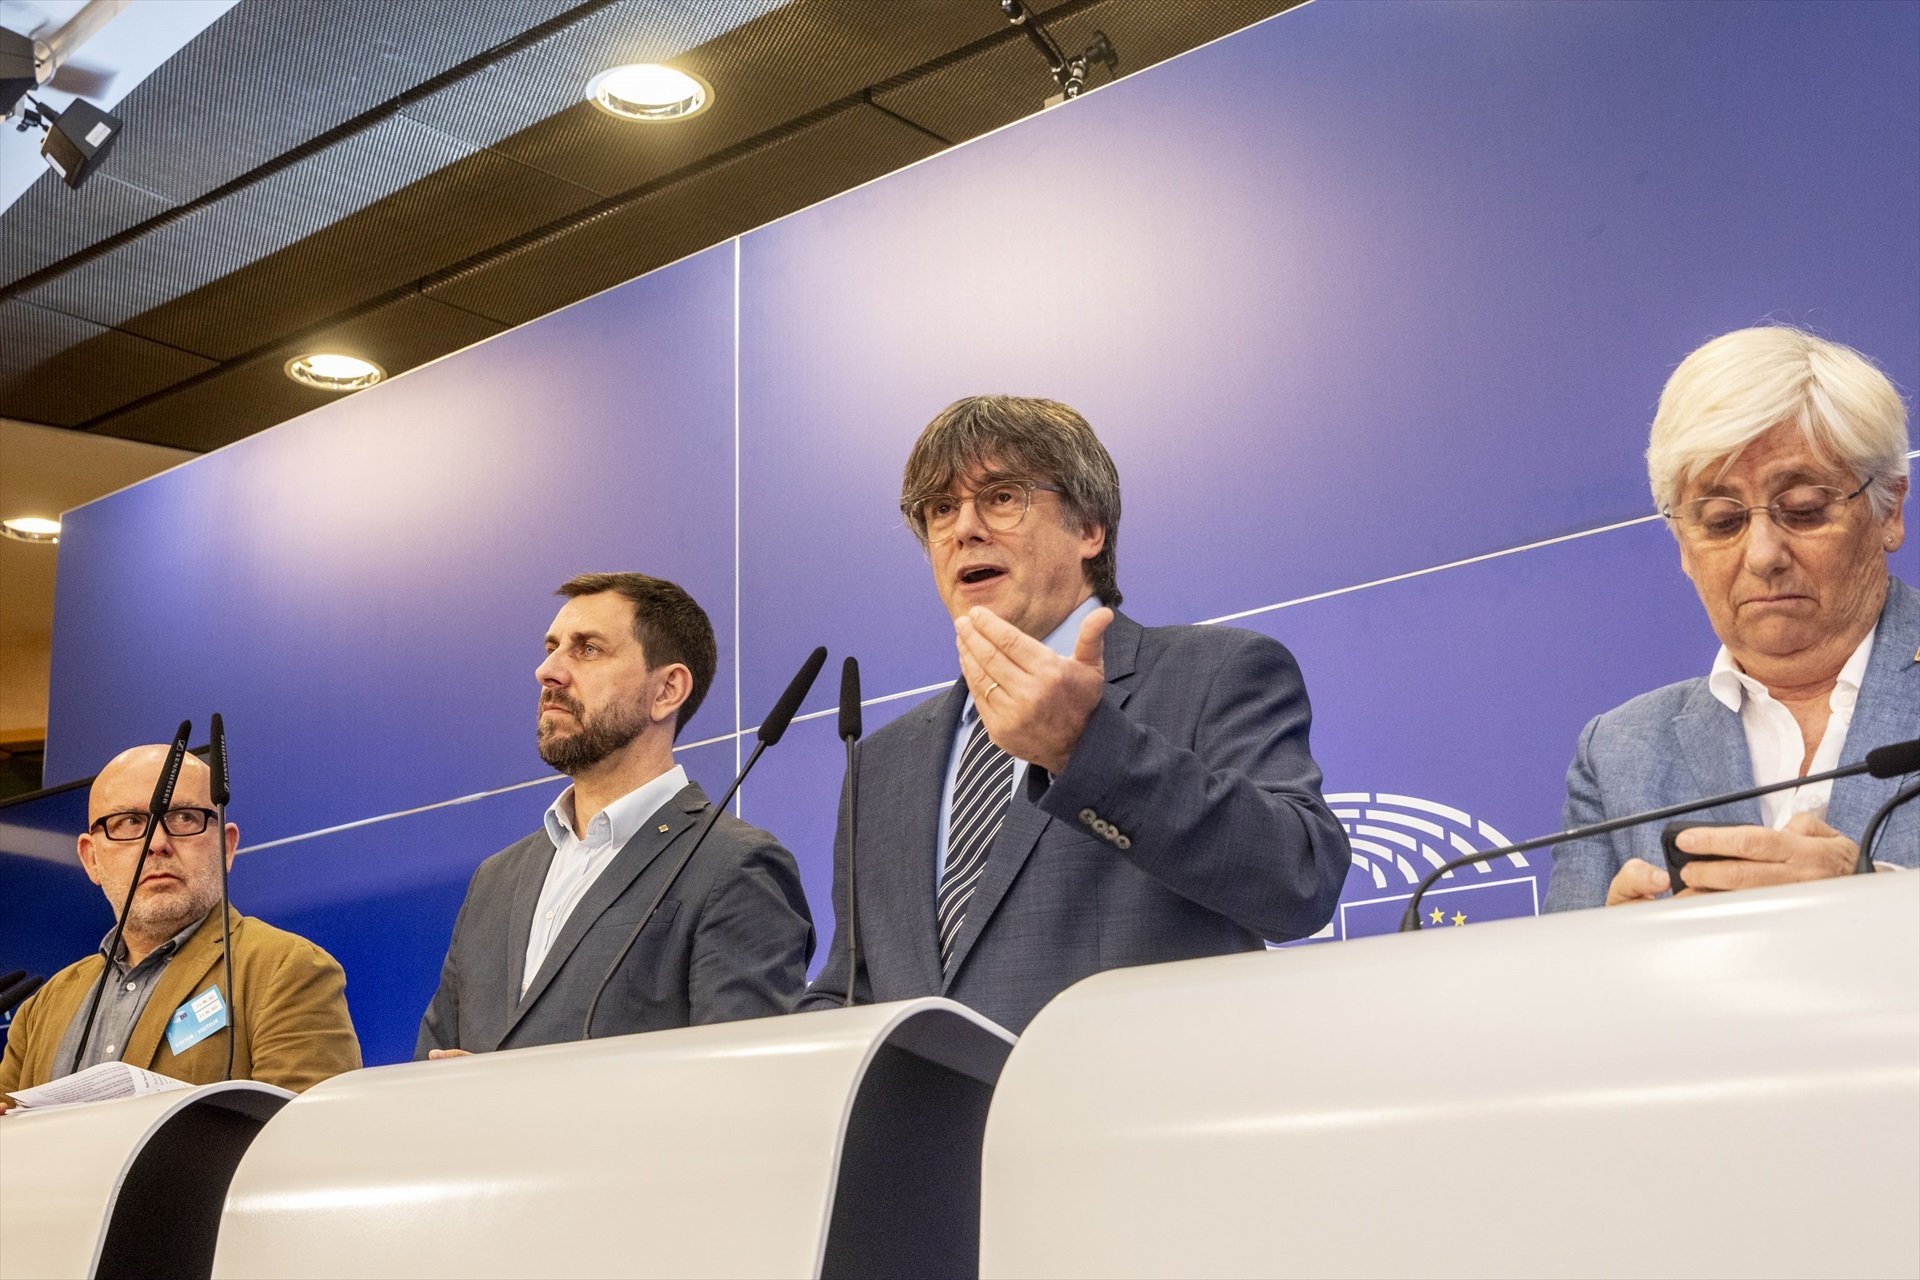 Puigdemont distances himself from Ponsati's comments on Catalan exile strategy: "She was wrong"